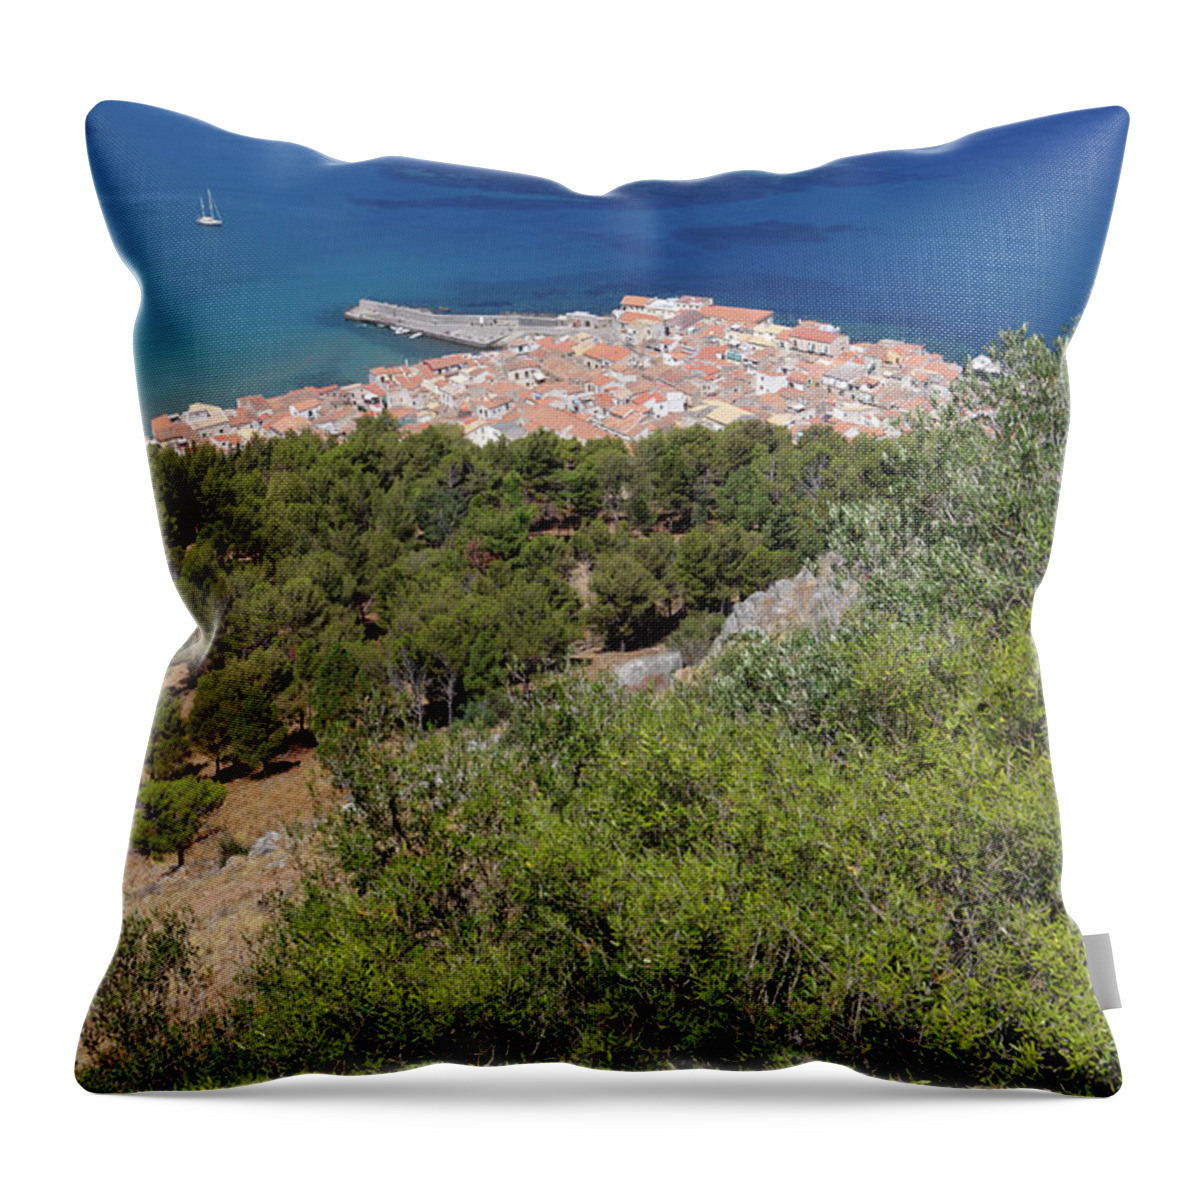 Tyrrhenian Sea Throw Pillow featuring the photograph Elevated View Of Cefalu In Sicily by Massimo Pizzotti